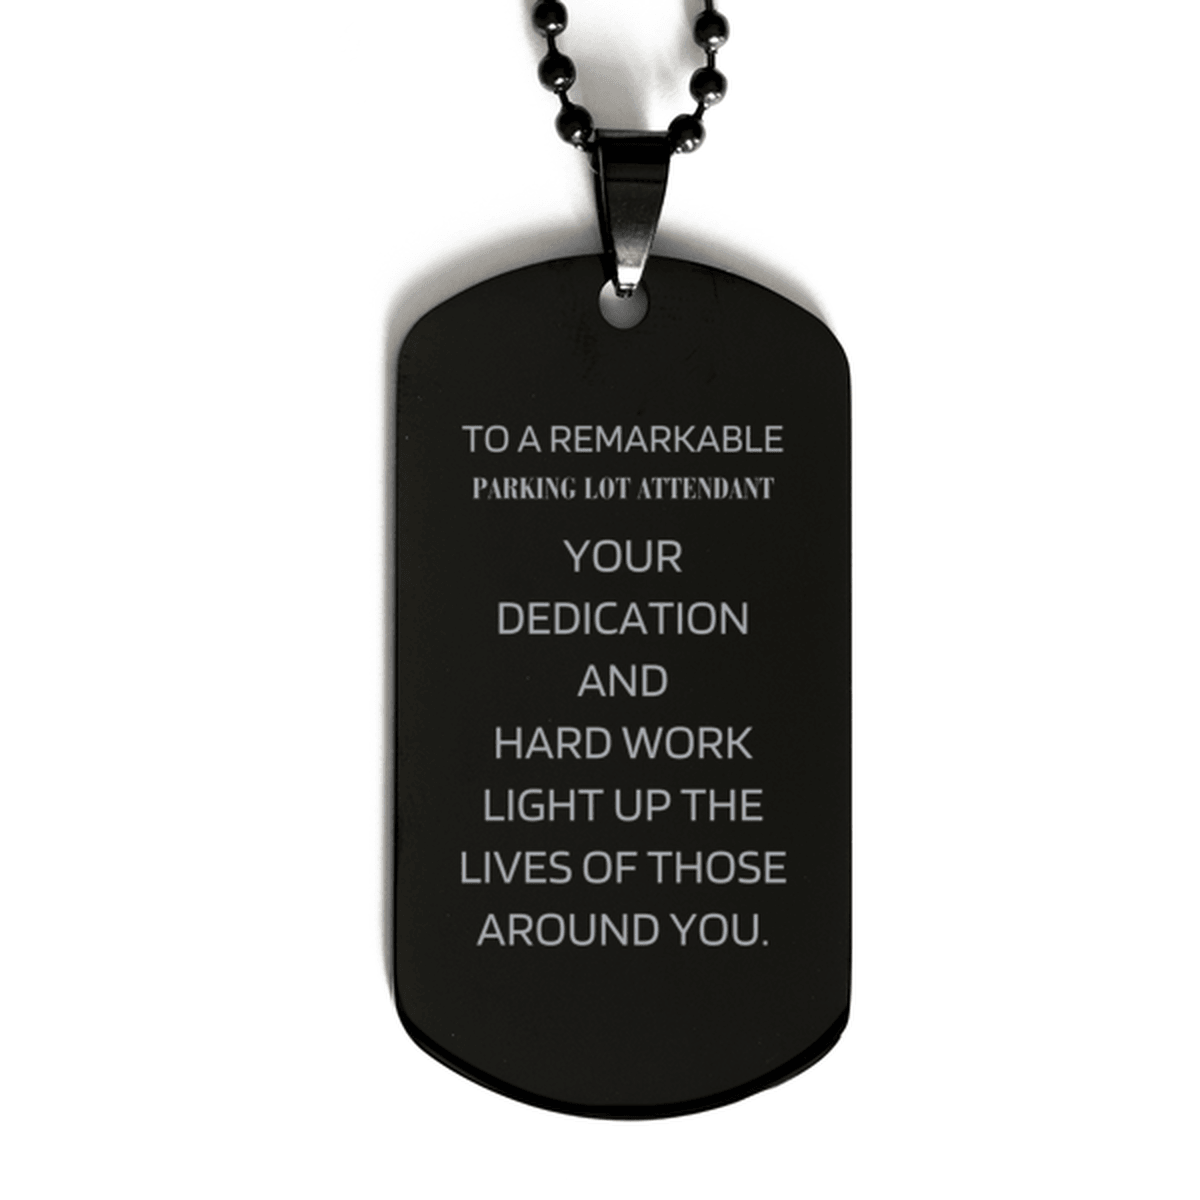 Remarkable Parking Lot Attendant Gifts, Your dedication and hard work, Inspirational Birthday Christmas Unique Black Dog Tag For Parking Lot Attendant, Coworkers, Men, Women, Friends - Mallard Moon Gift Shop